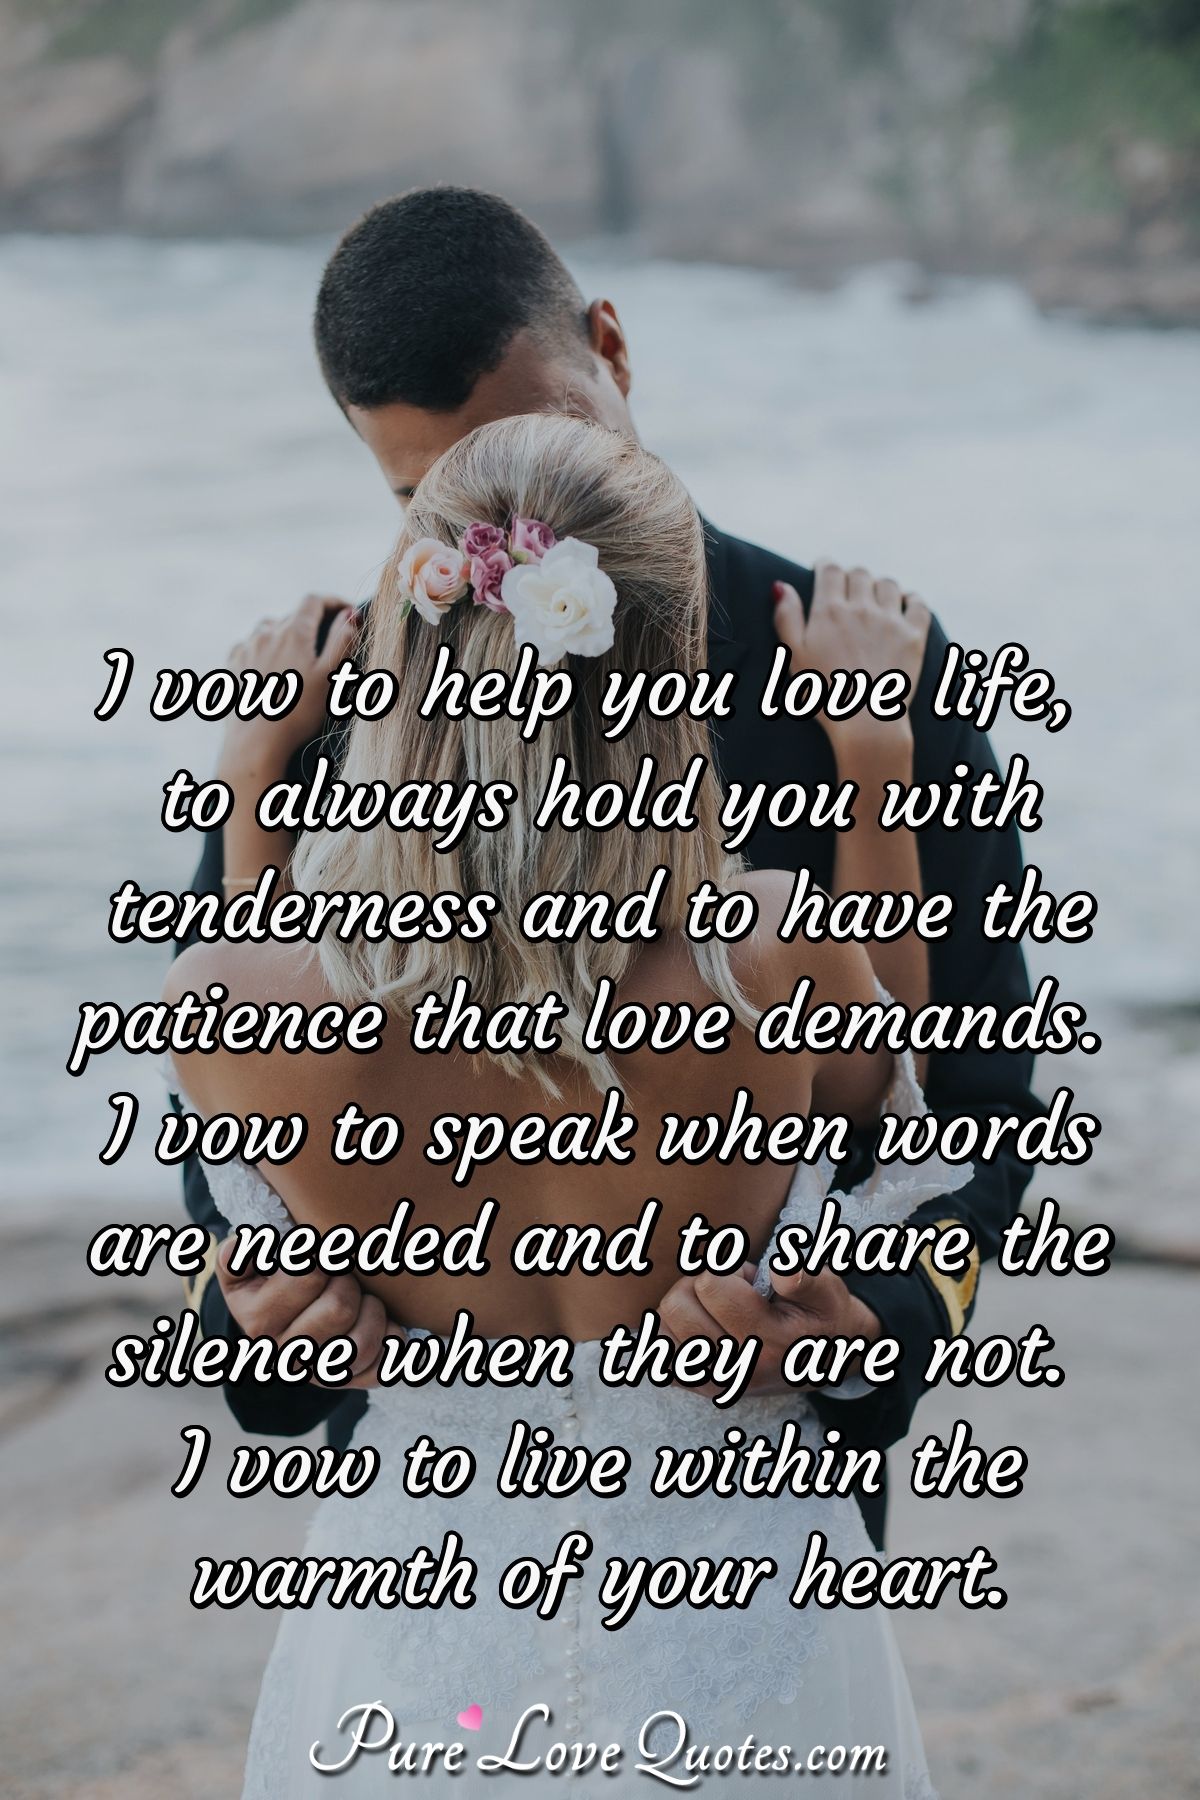 I vow to help you love life, to always hold you with tenderness and to have the patience that love demands. I vow to speak when words are needed and to share the silence when they are not.  I vow to live within the warmth of your heart. - Anonymous